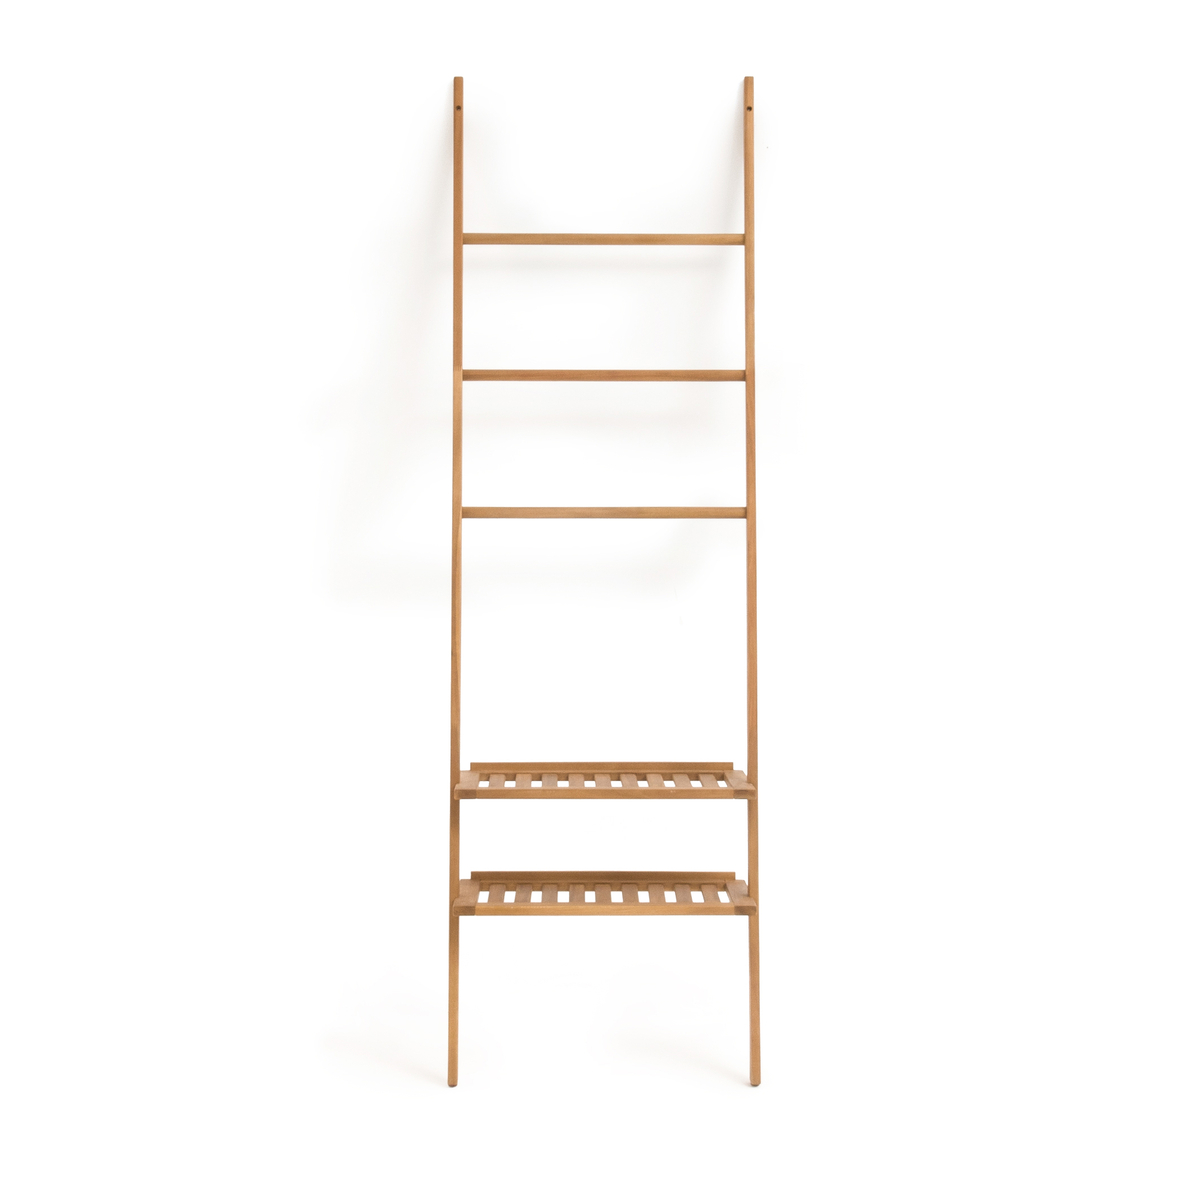 Ladder-Style Shelving Unit in Oiled Acacia with Teak Finish